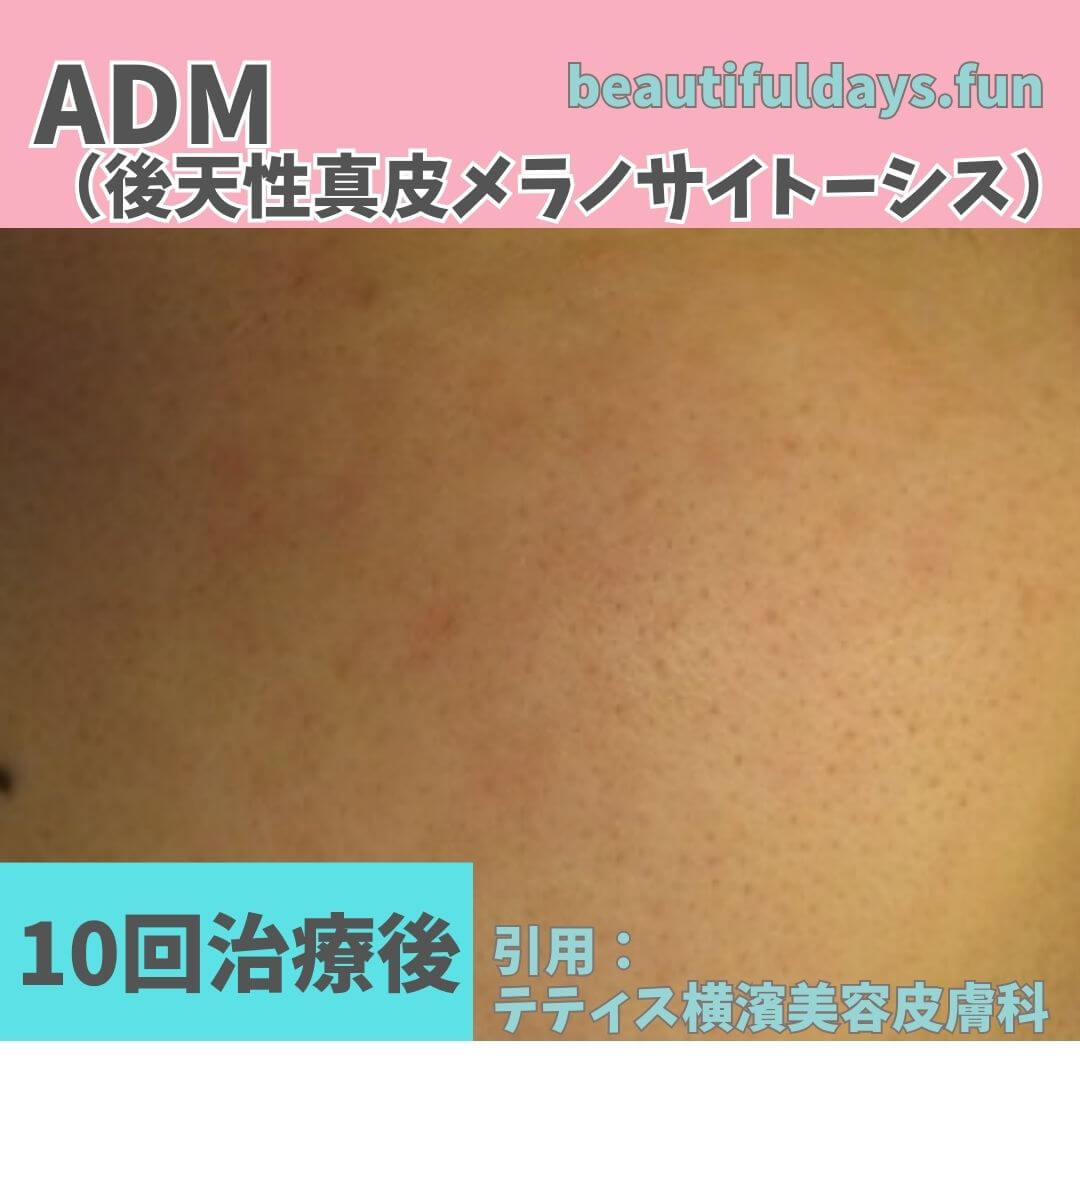 ADM-After